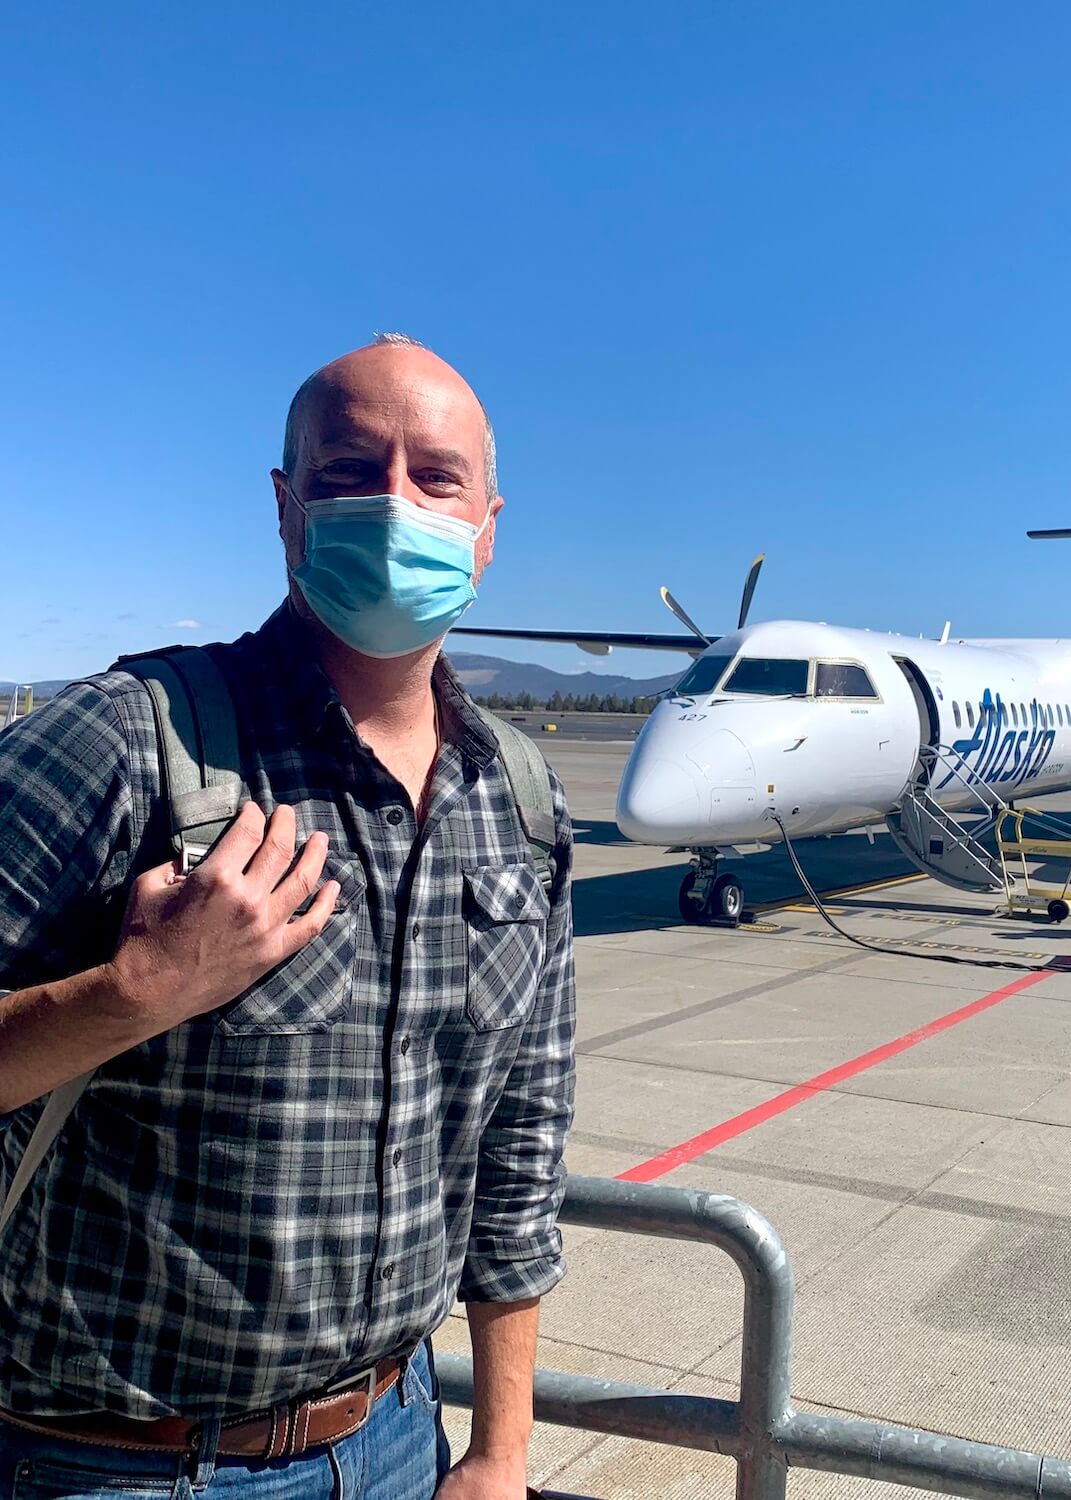 Matthew Kessi deplanes from his Alaska Airlines flight after using frequent flyer miles to fly to Redmond/Bend Airport for a  quick getaway.  He's wearing a face mask and carrying a backpack. 